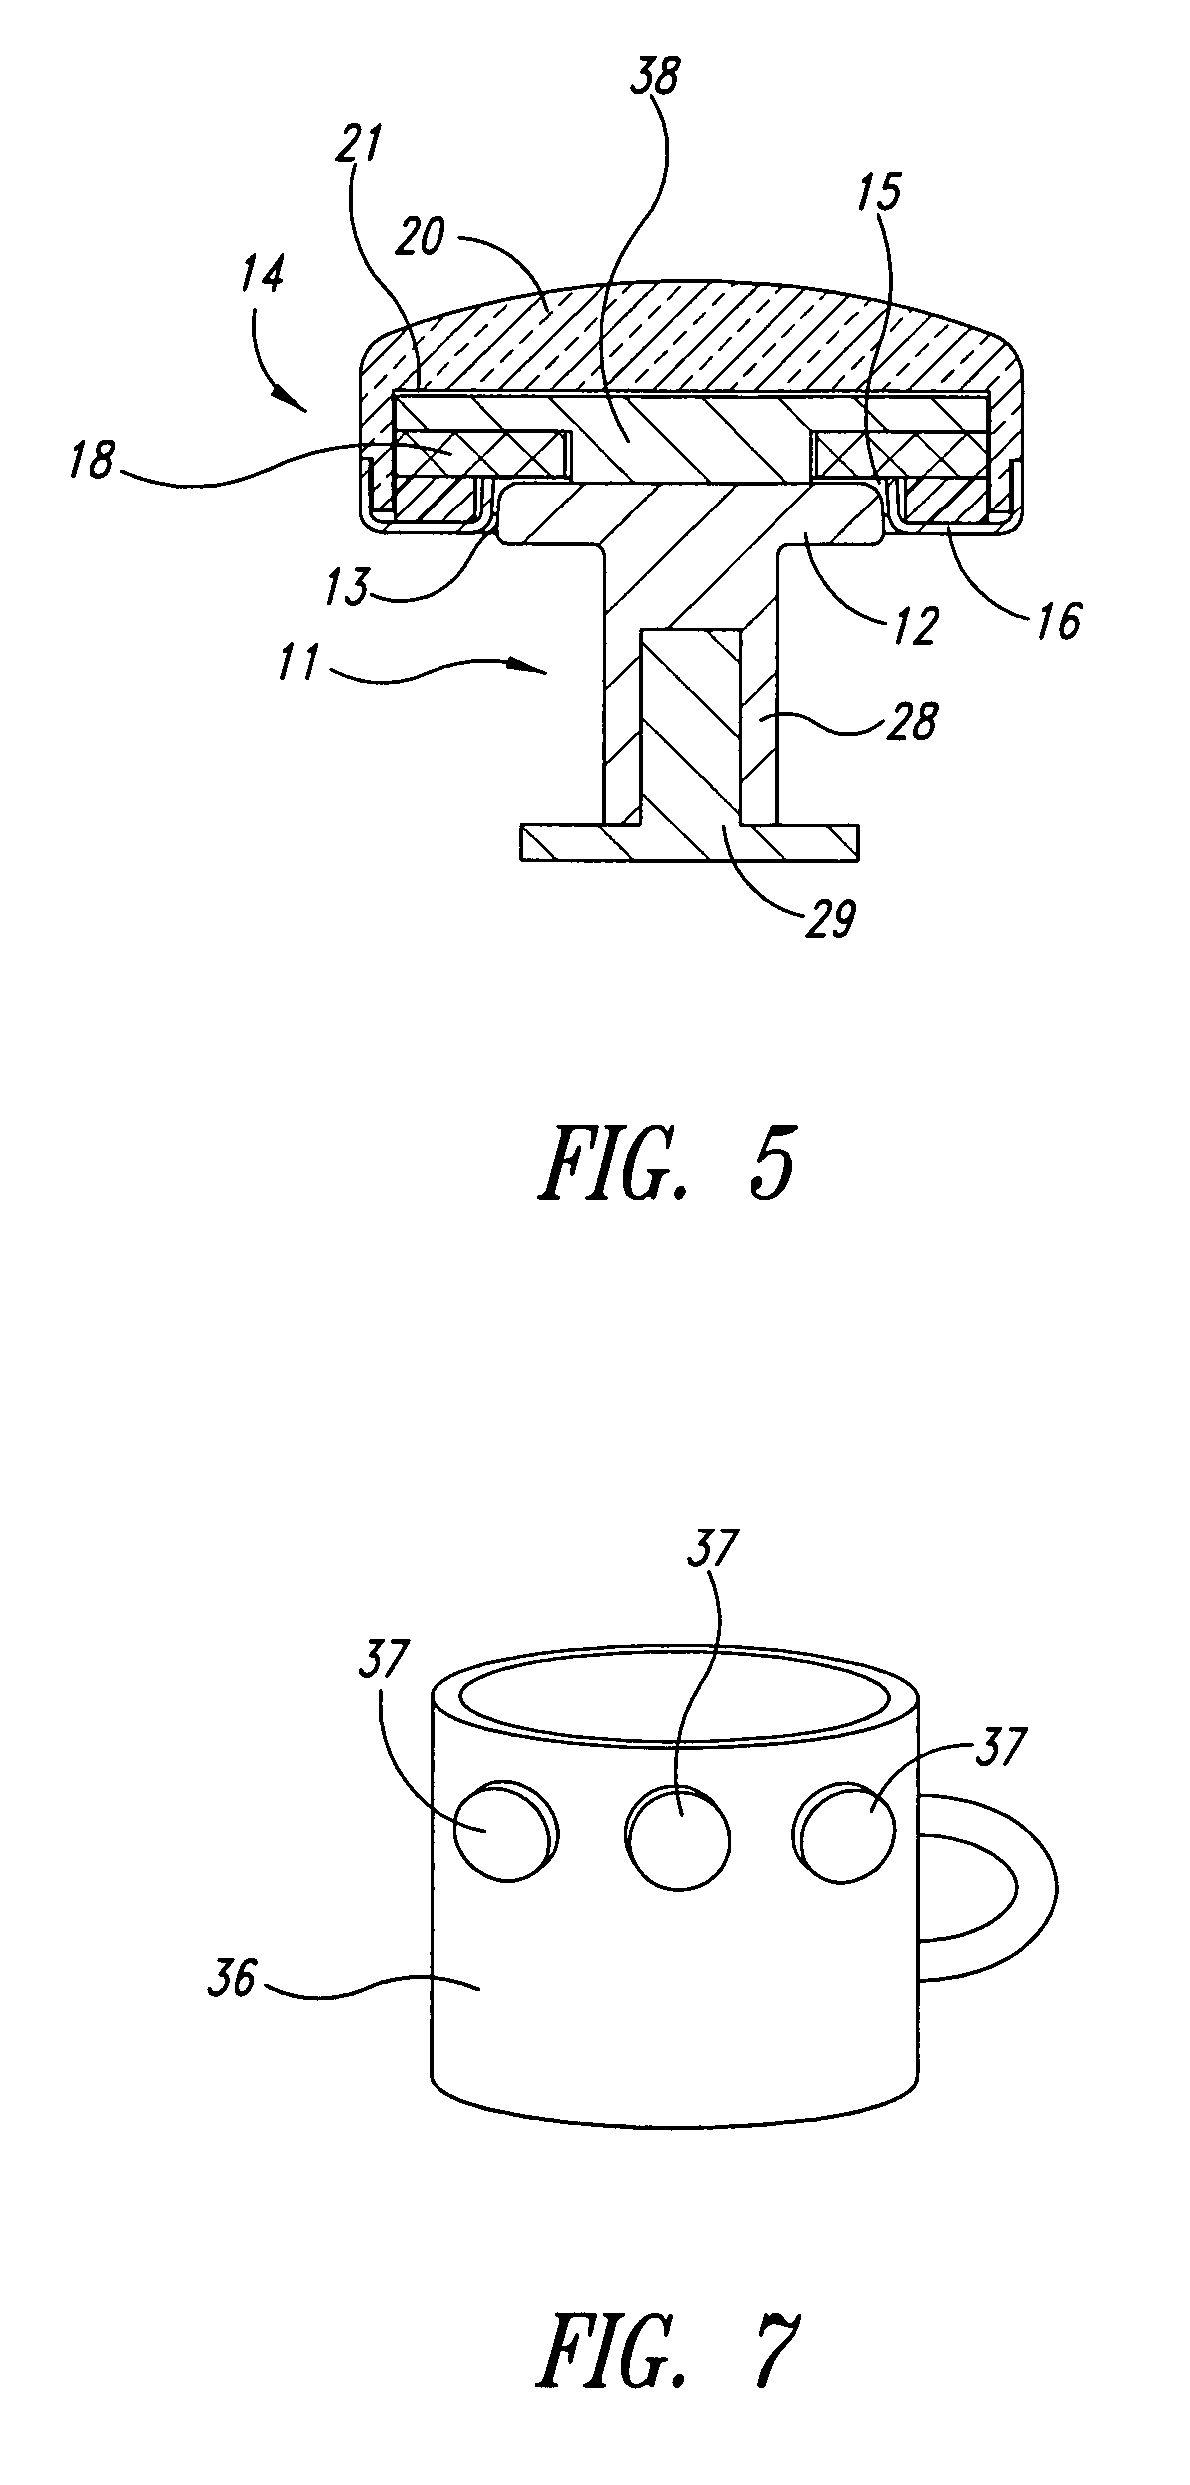 Apparatus for securing ornamentation to personal items